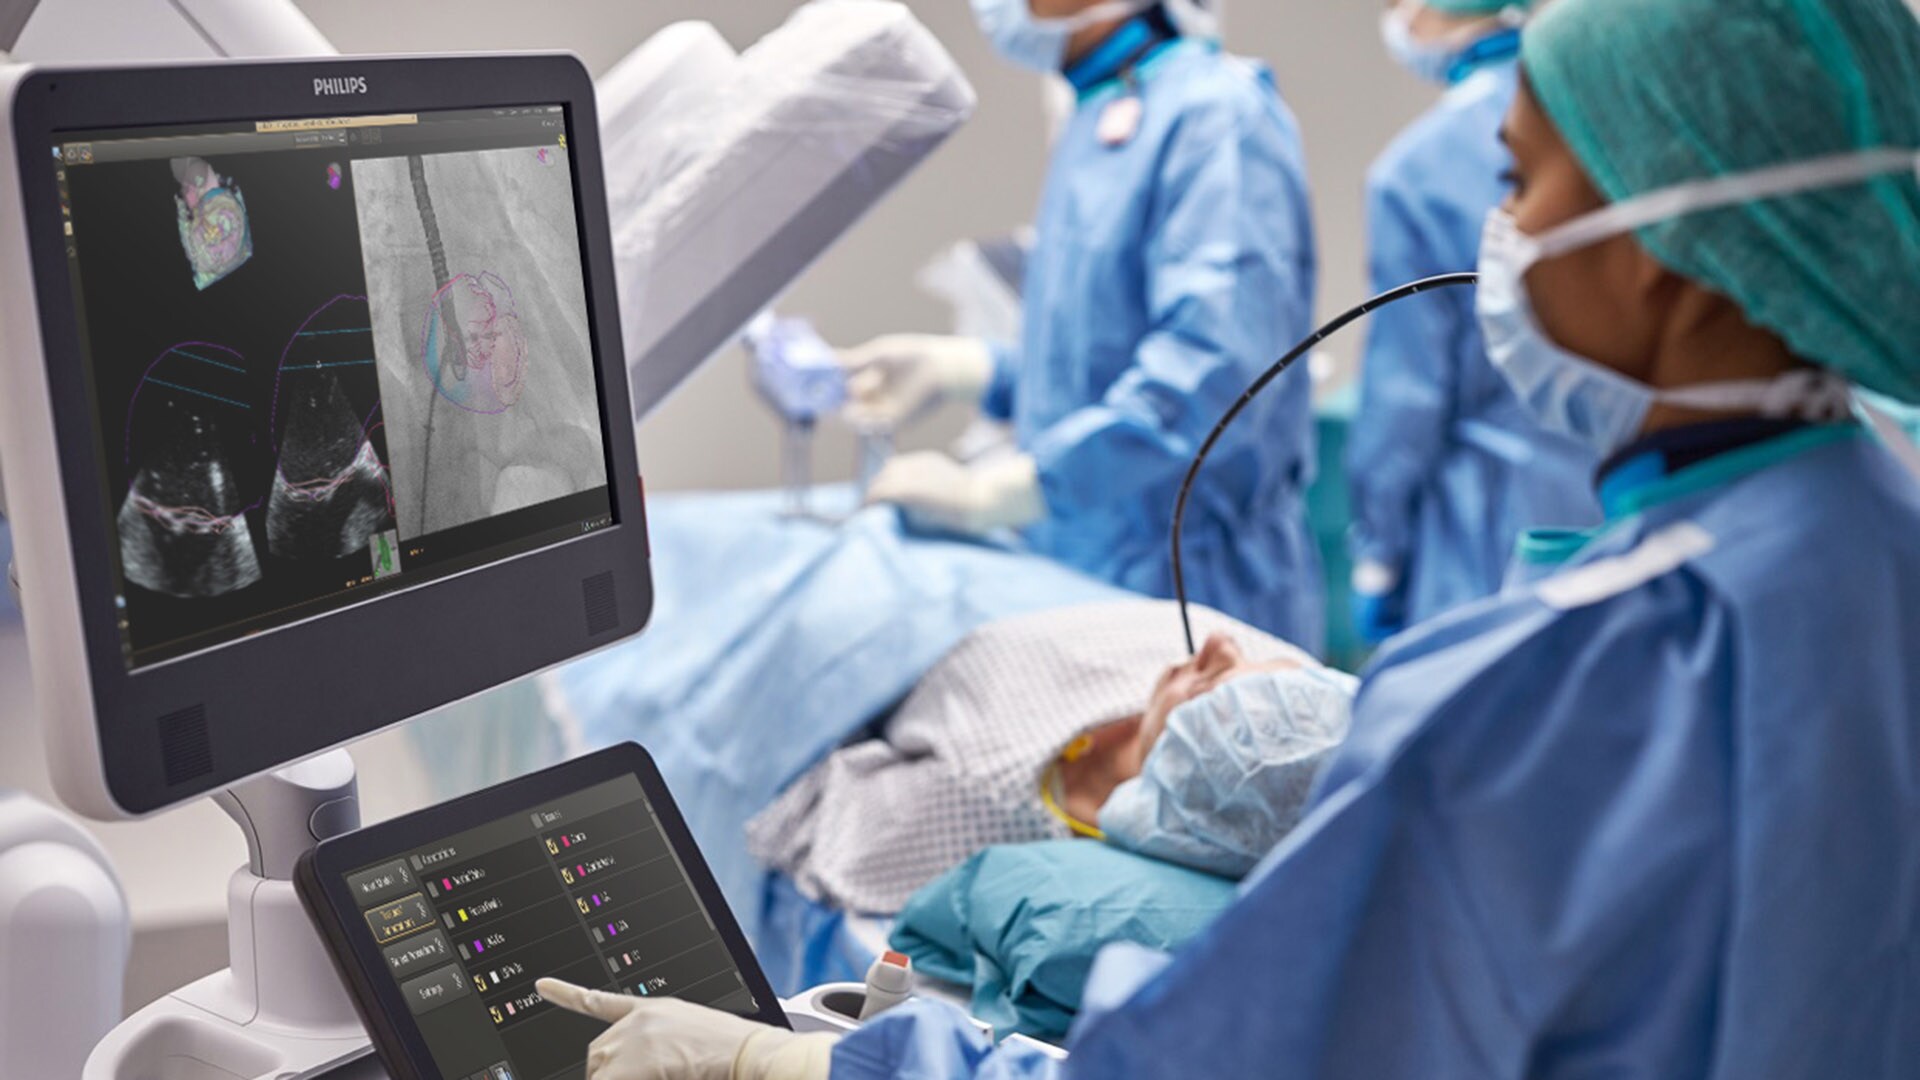 Philips showcases clinical data and solutions designed to deliver better cardiac care with greater efficiency at TCT 2022